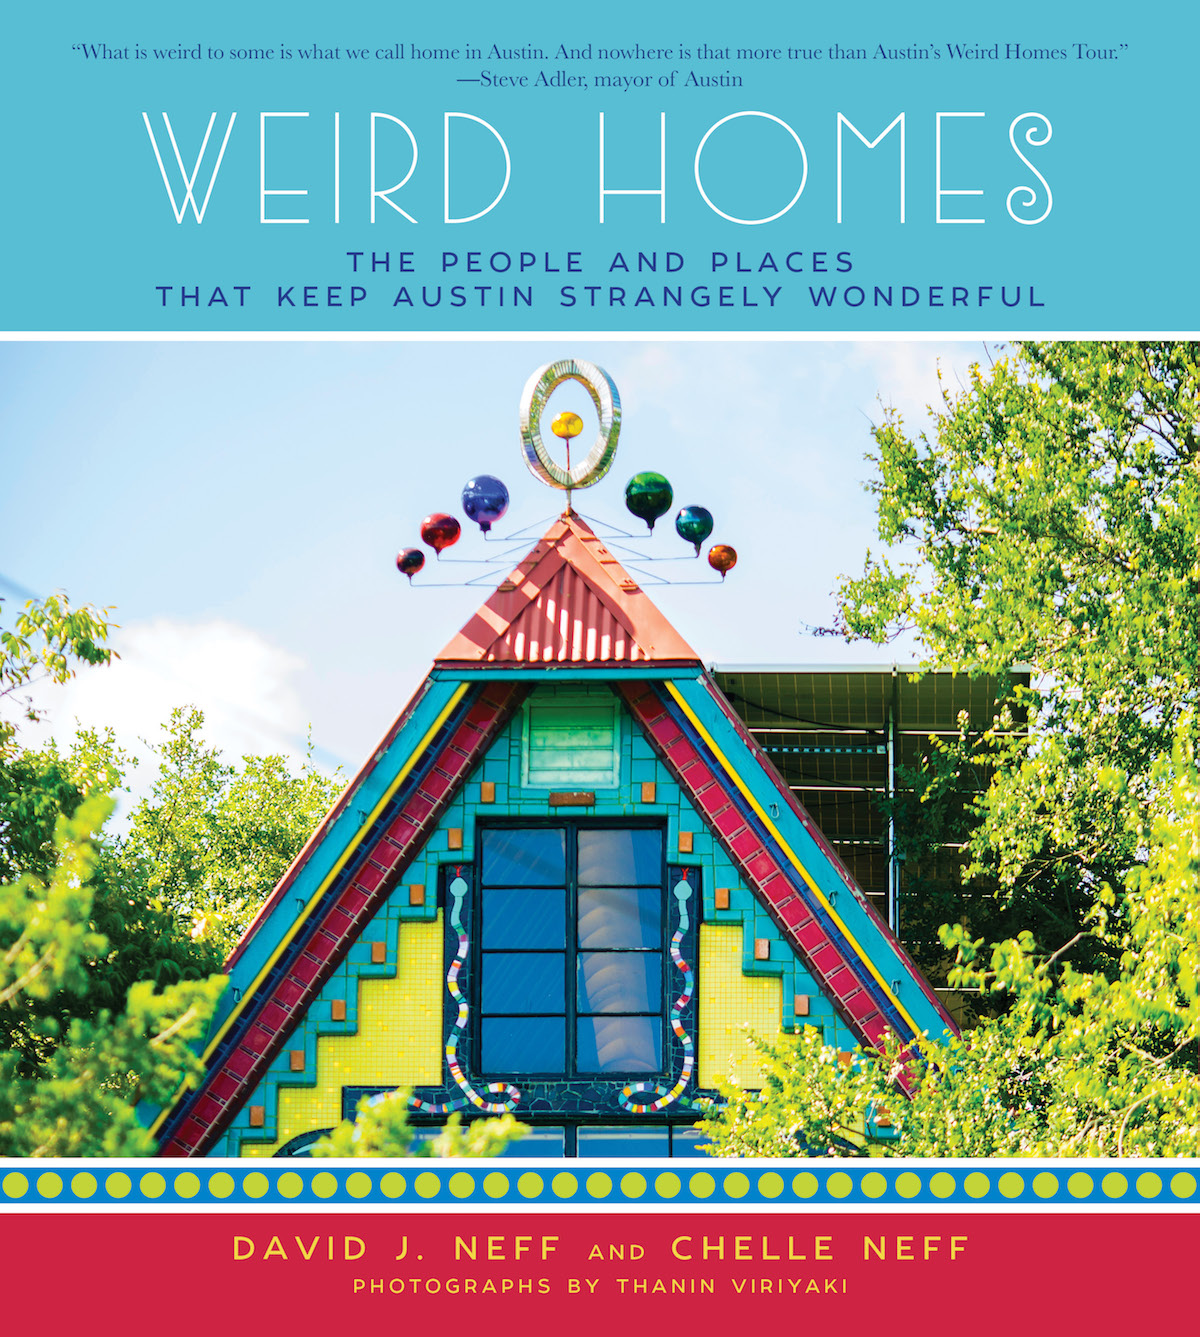 Weird Homes The People and Places That Keep Austin Strangely Wonderful